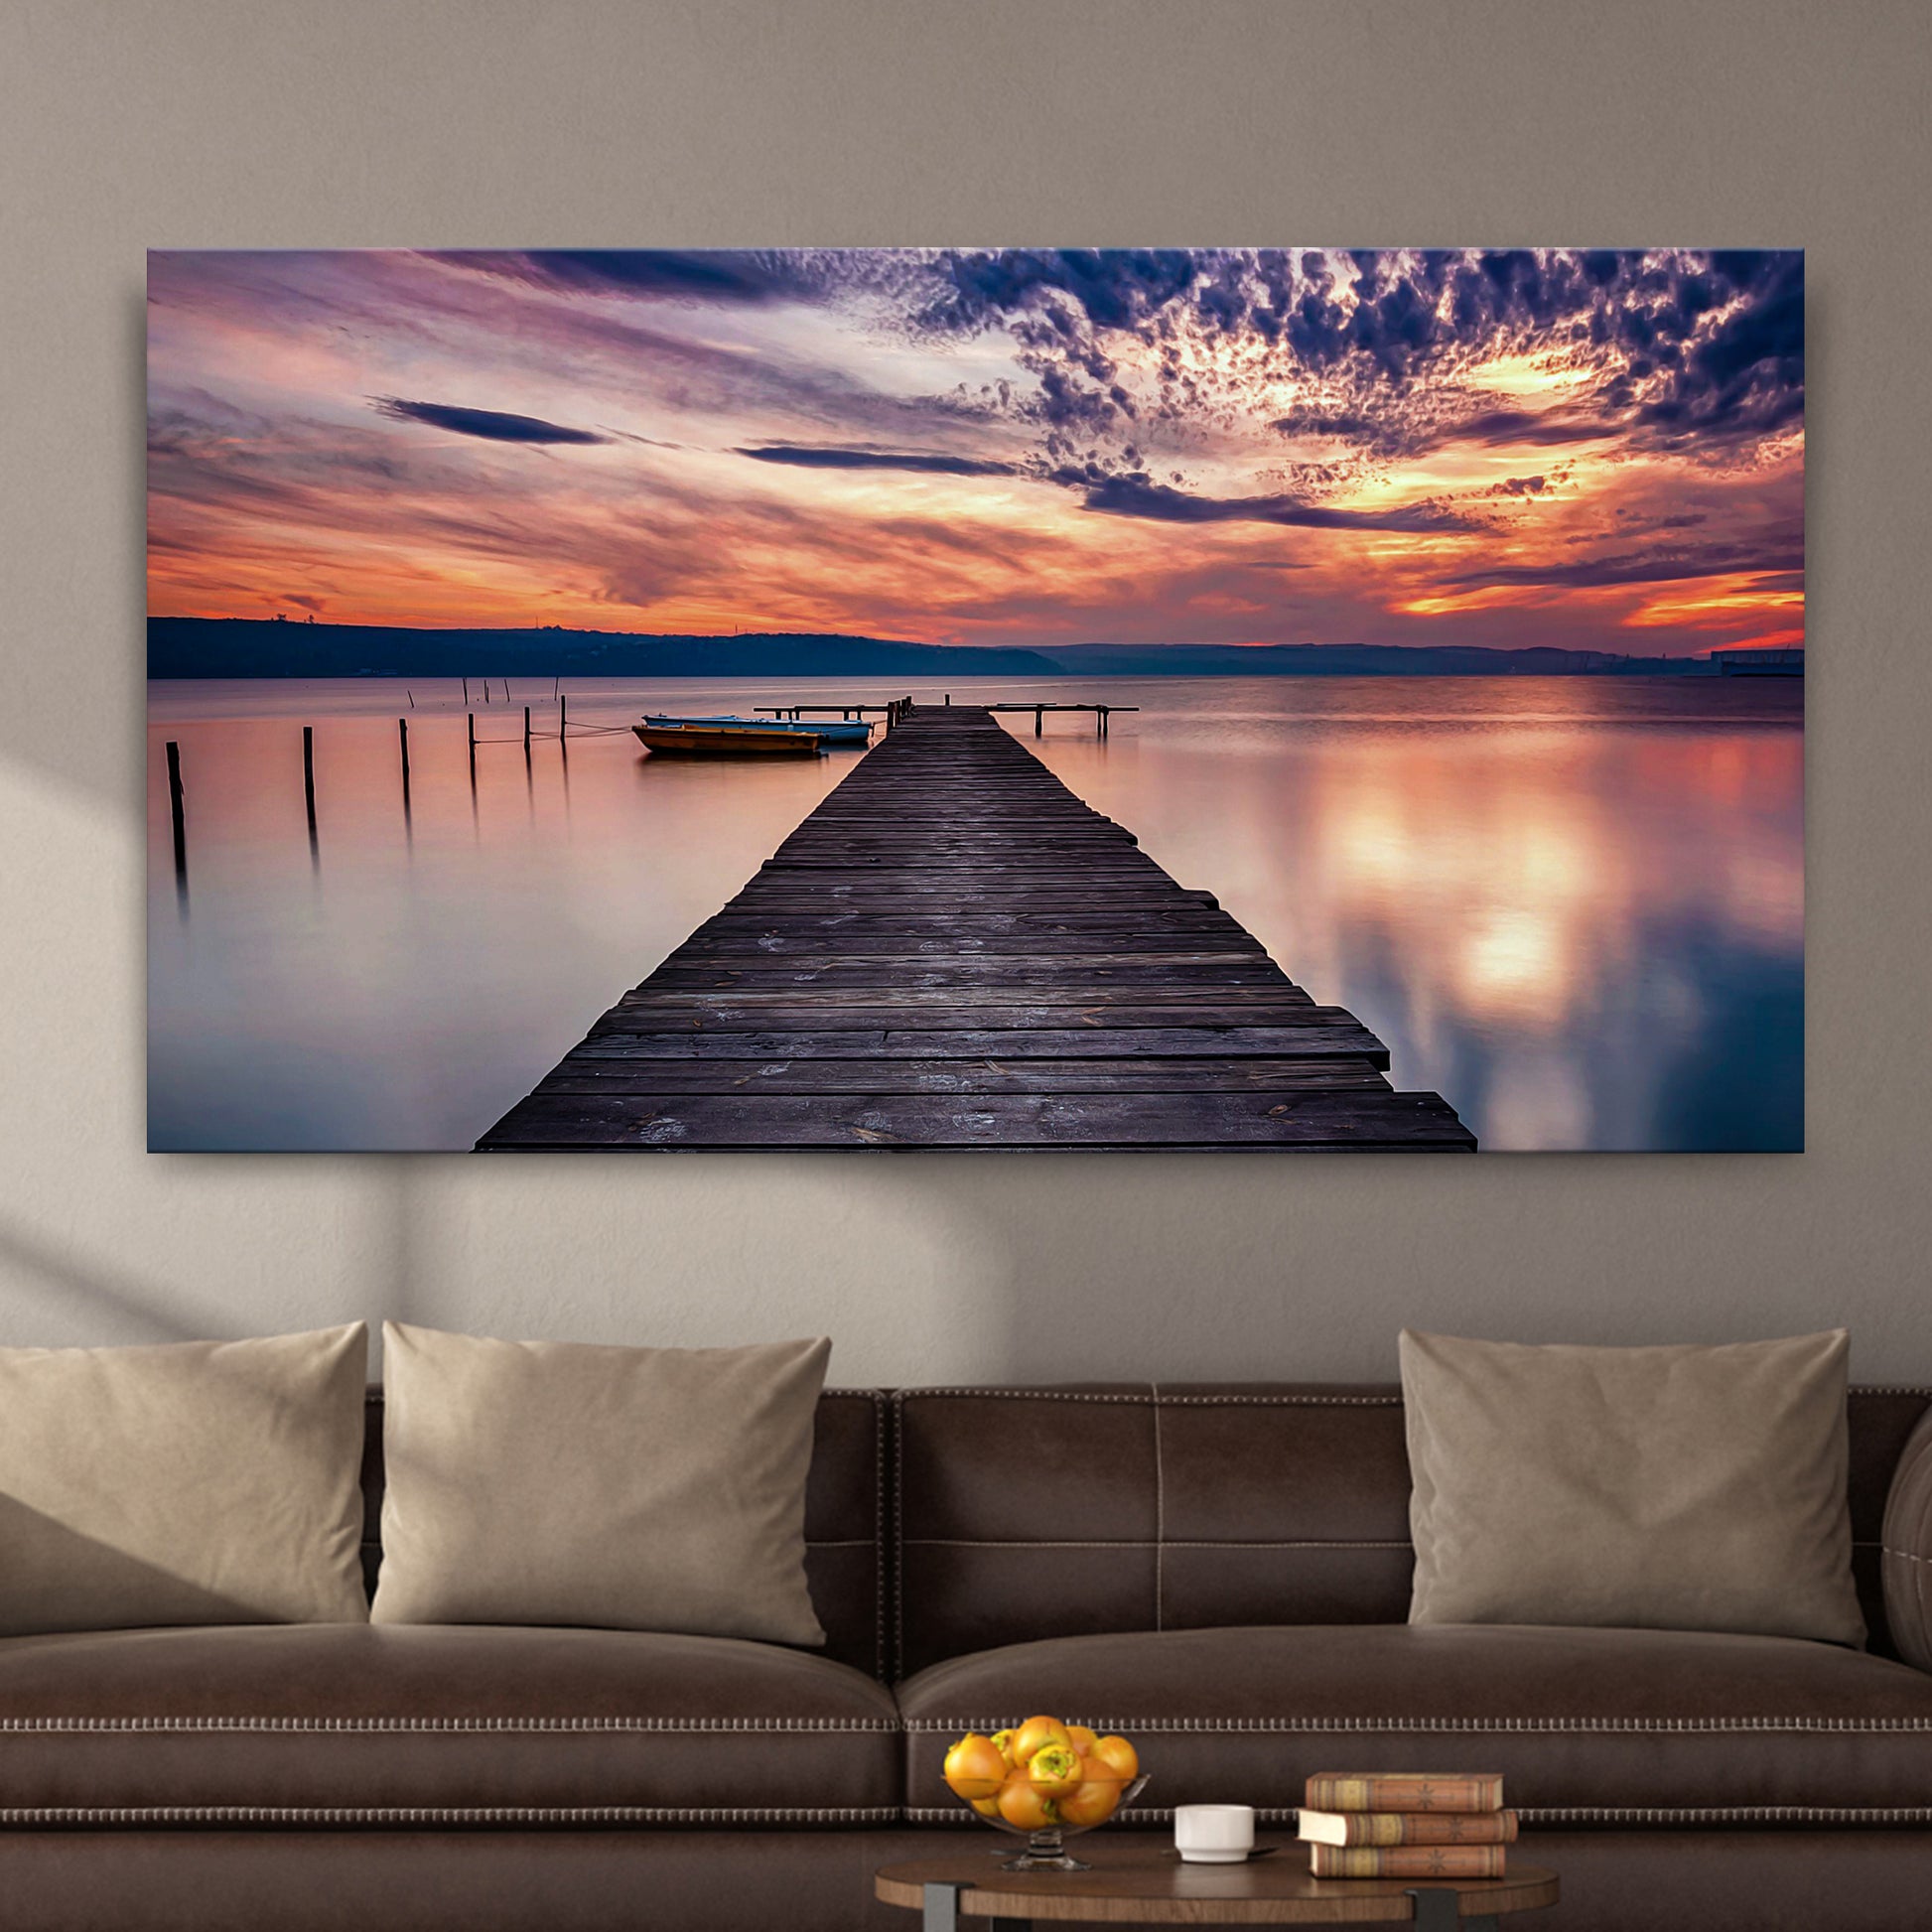 The Sunset Lake Canvas Wall Art Style 2 - Image by Tailored Canvases